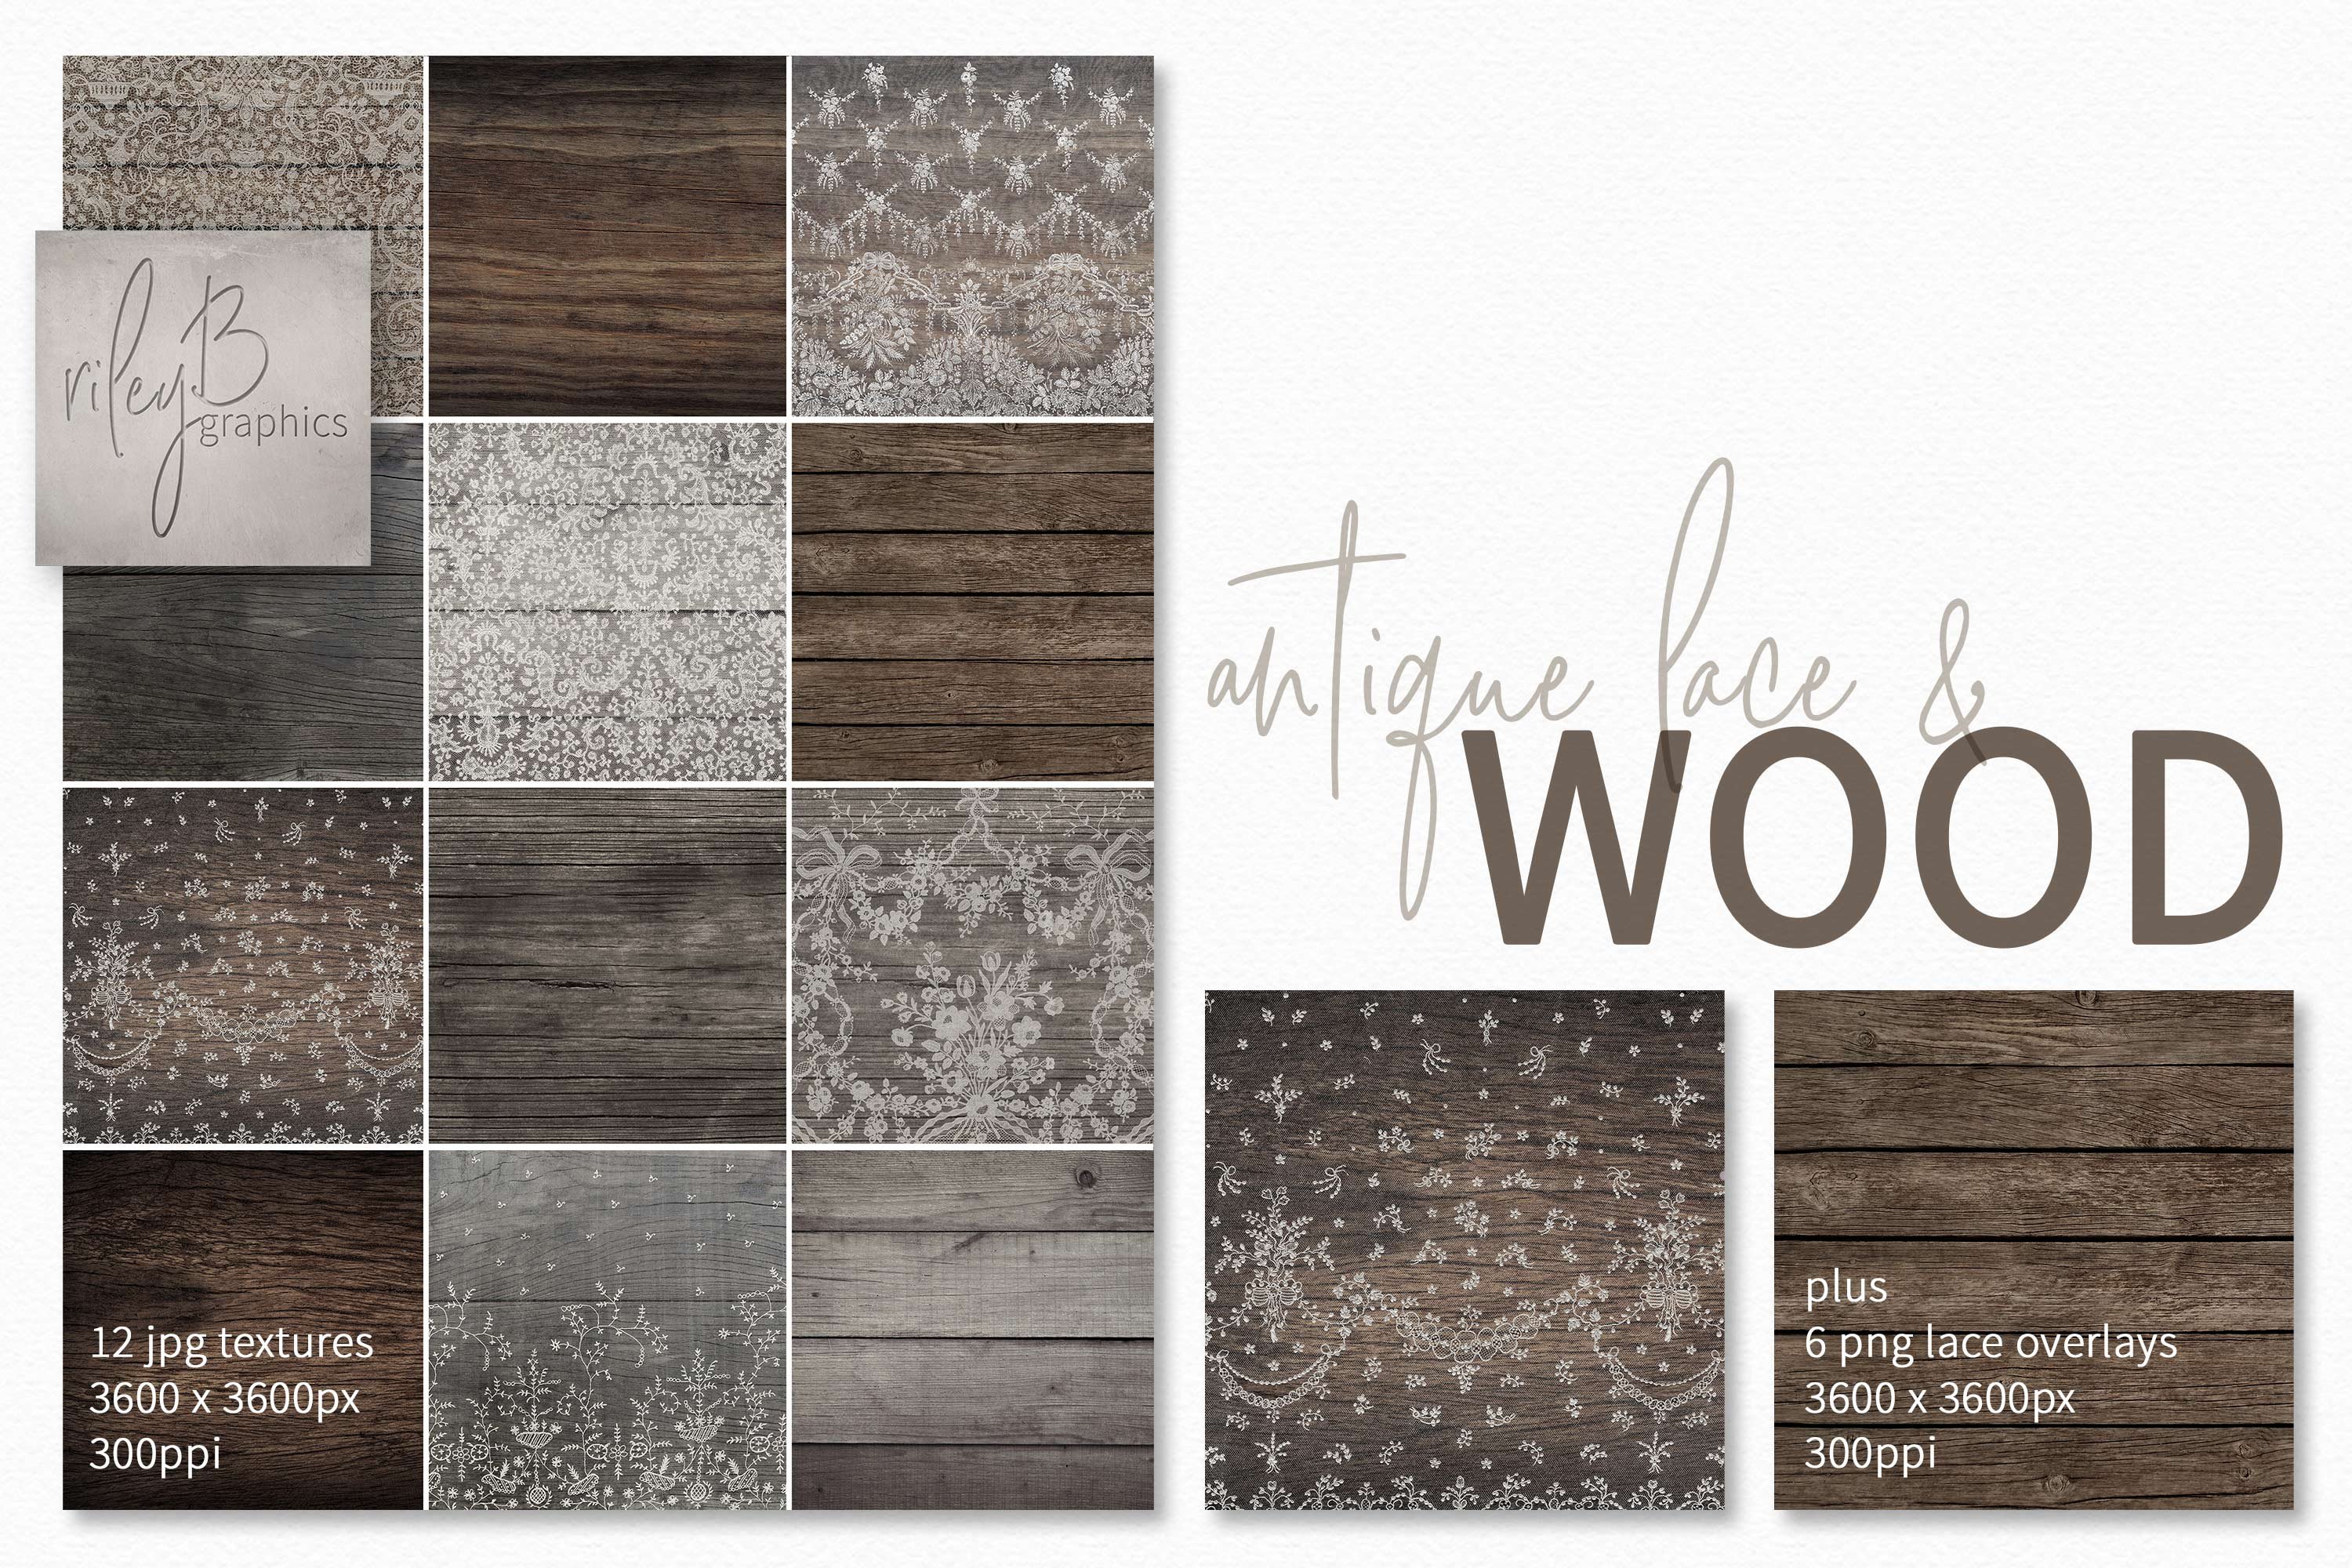 Antique Lace and Wood Textures cover image.